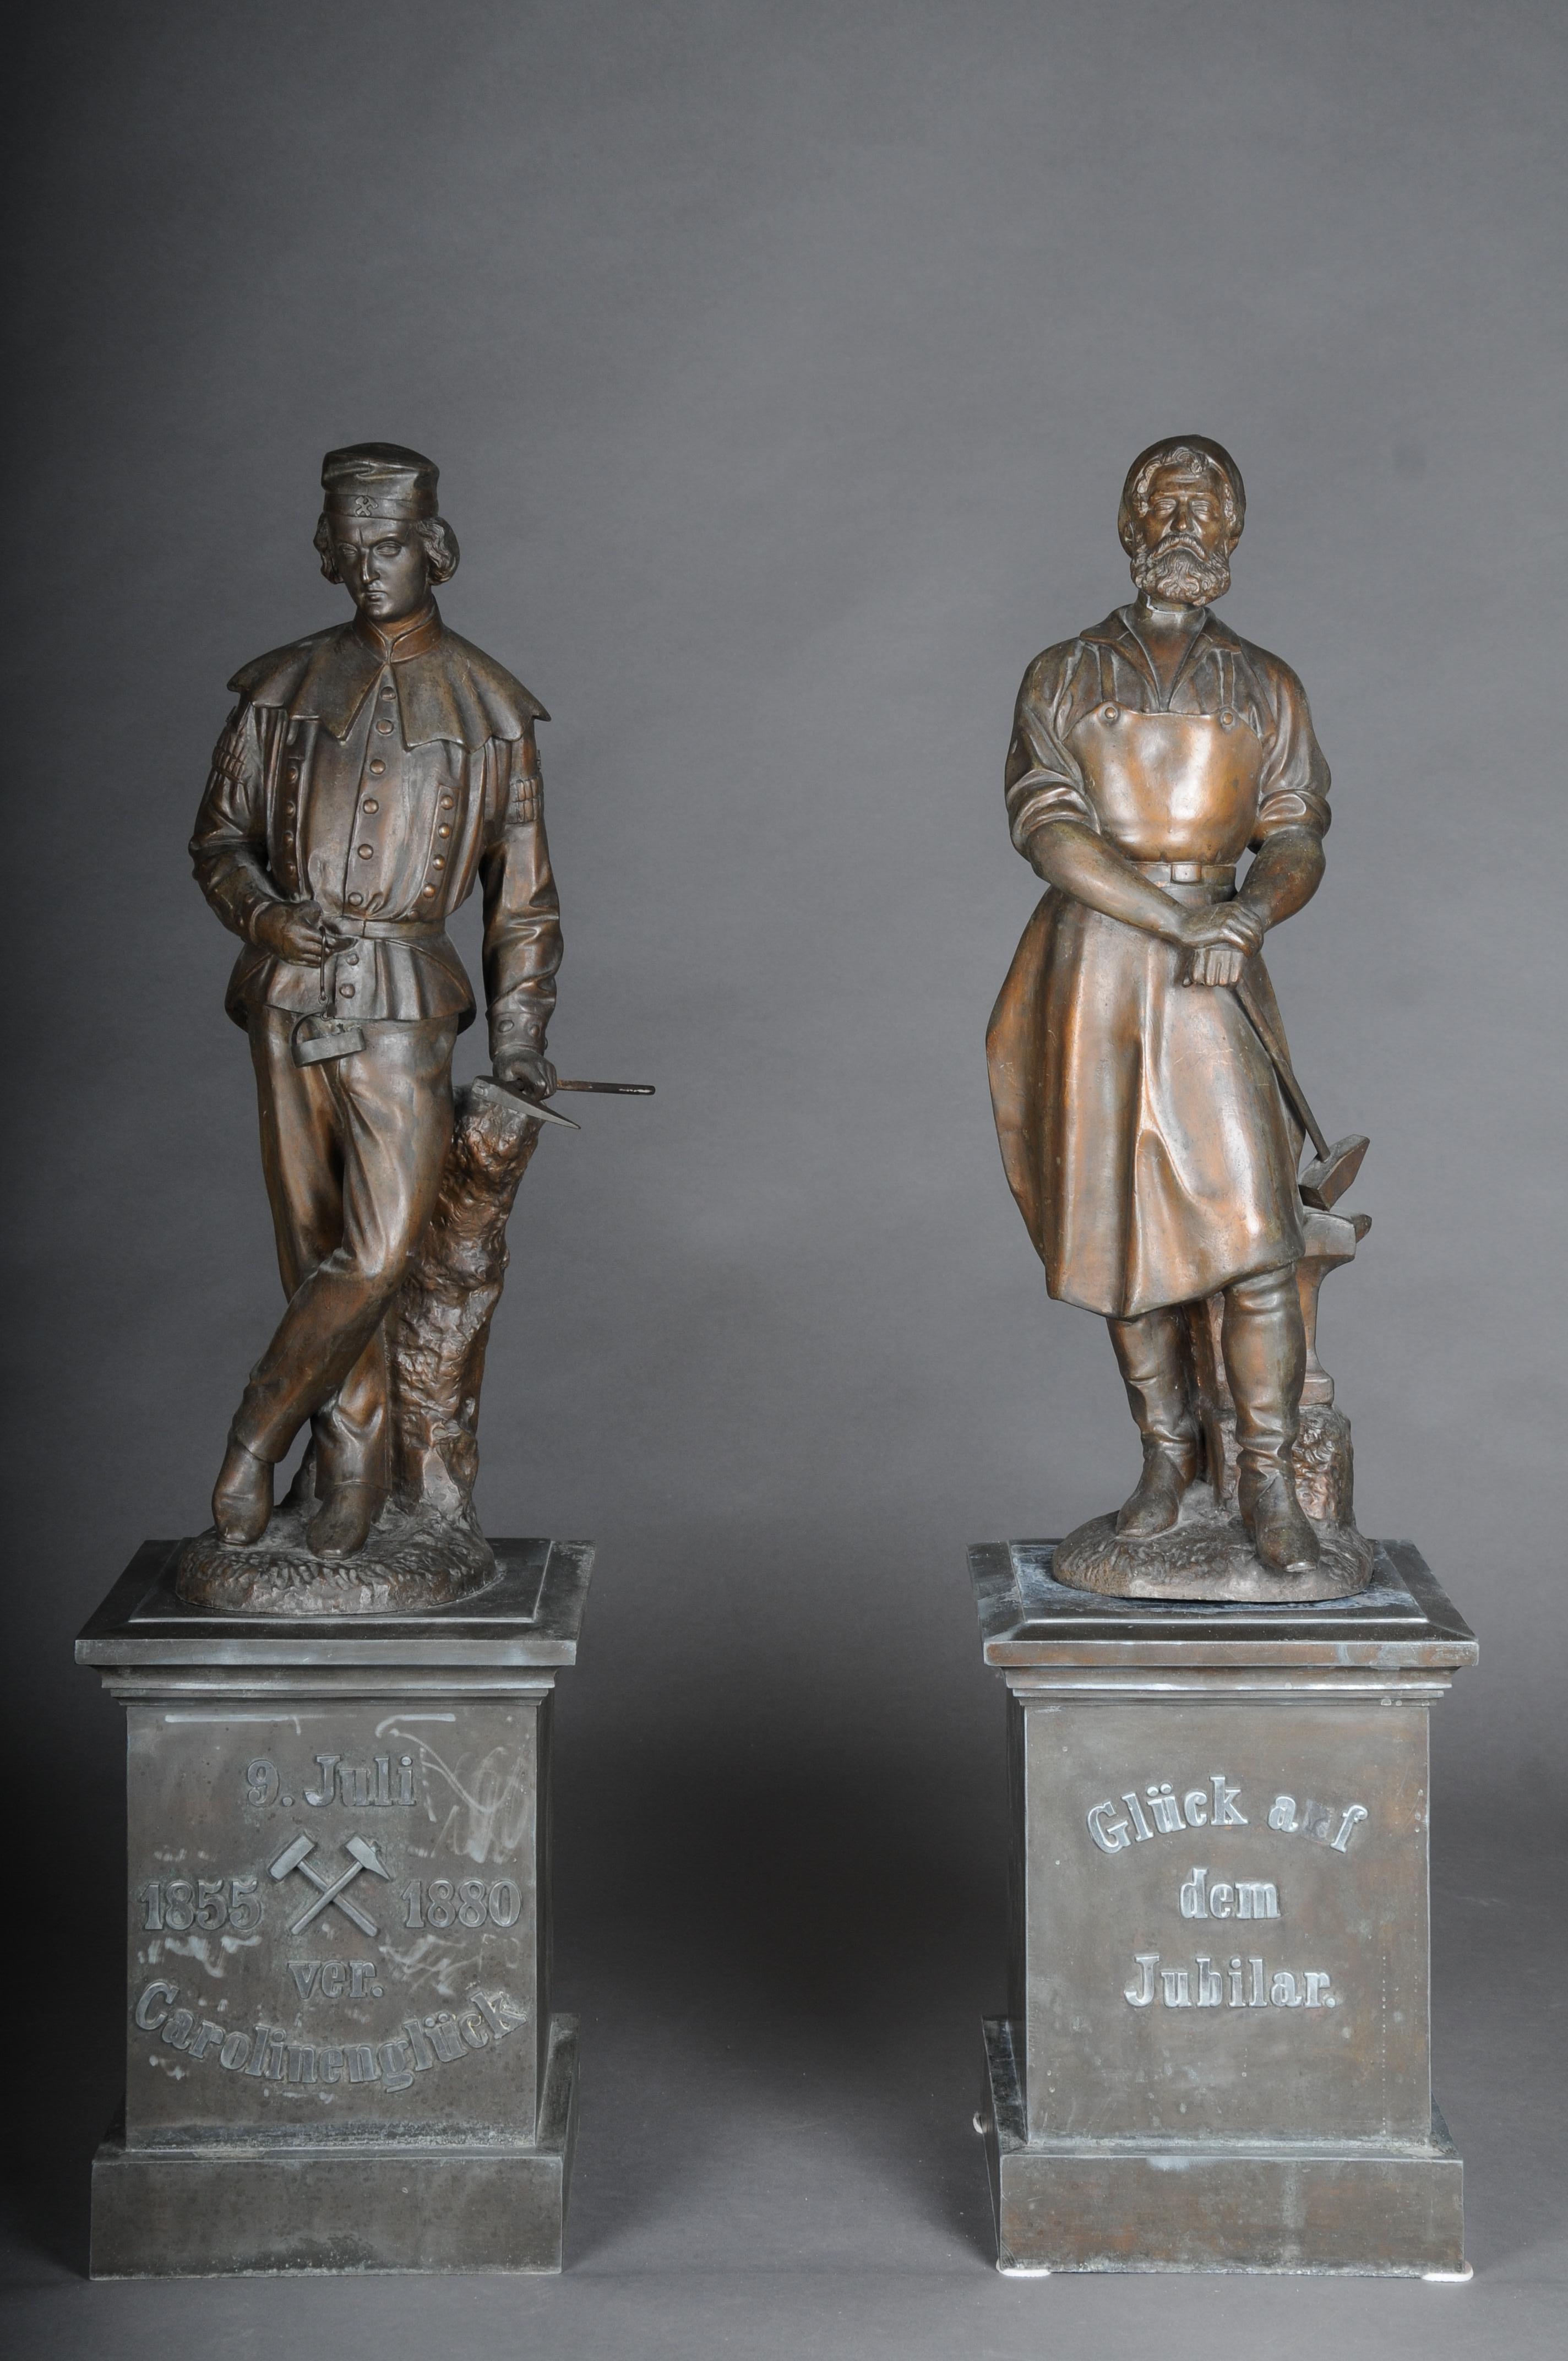 Pair (2) of large craftsmen's guild, metalworkers, bronzed


Impressive pair of antique sculptures from a craft guild dated 1855-1888, Germany.
Zinc bronzed. Very decorative and very rare. well-crafted. Figures stand on high posterments.